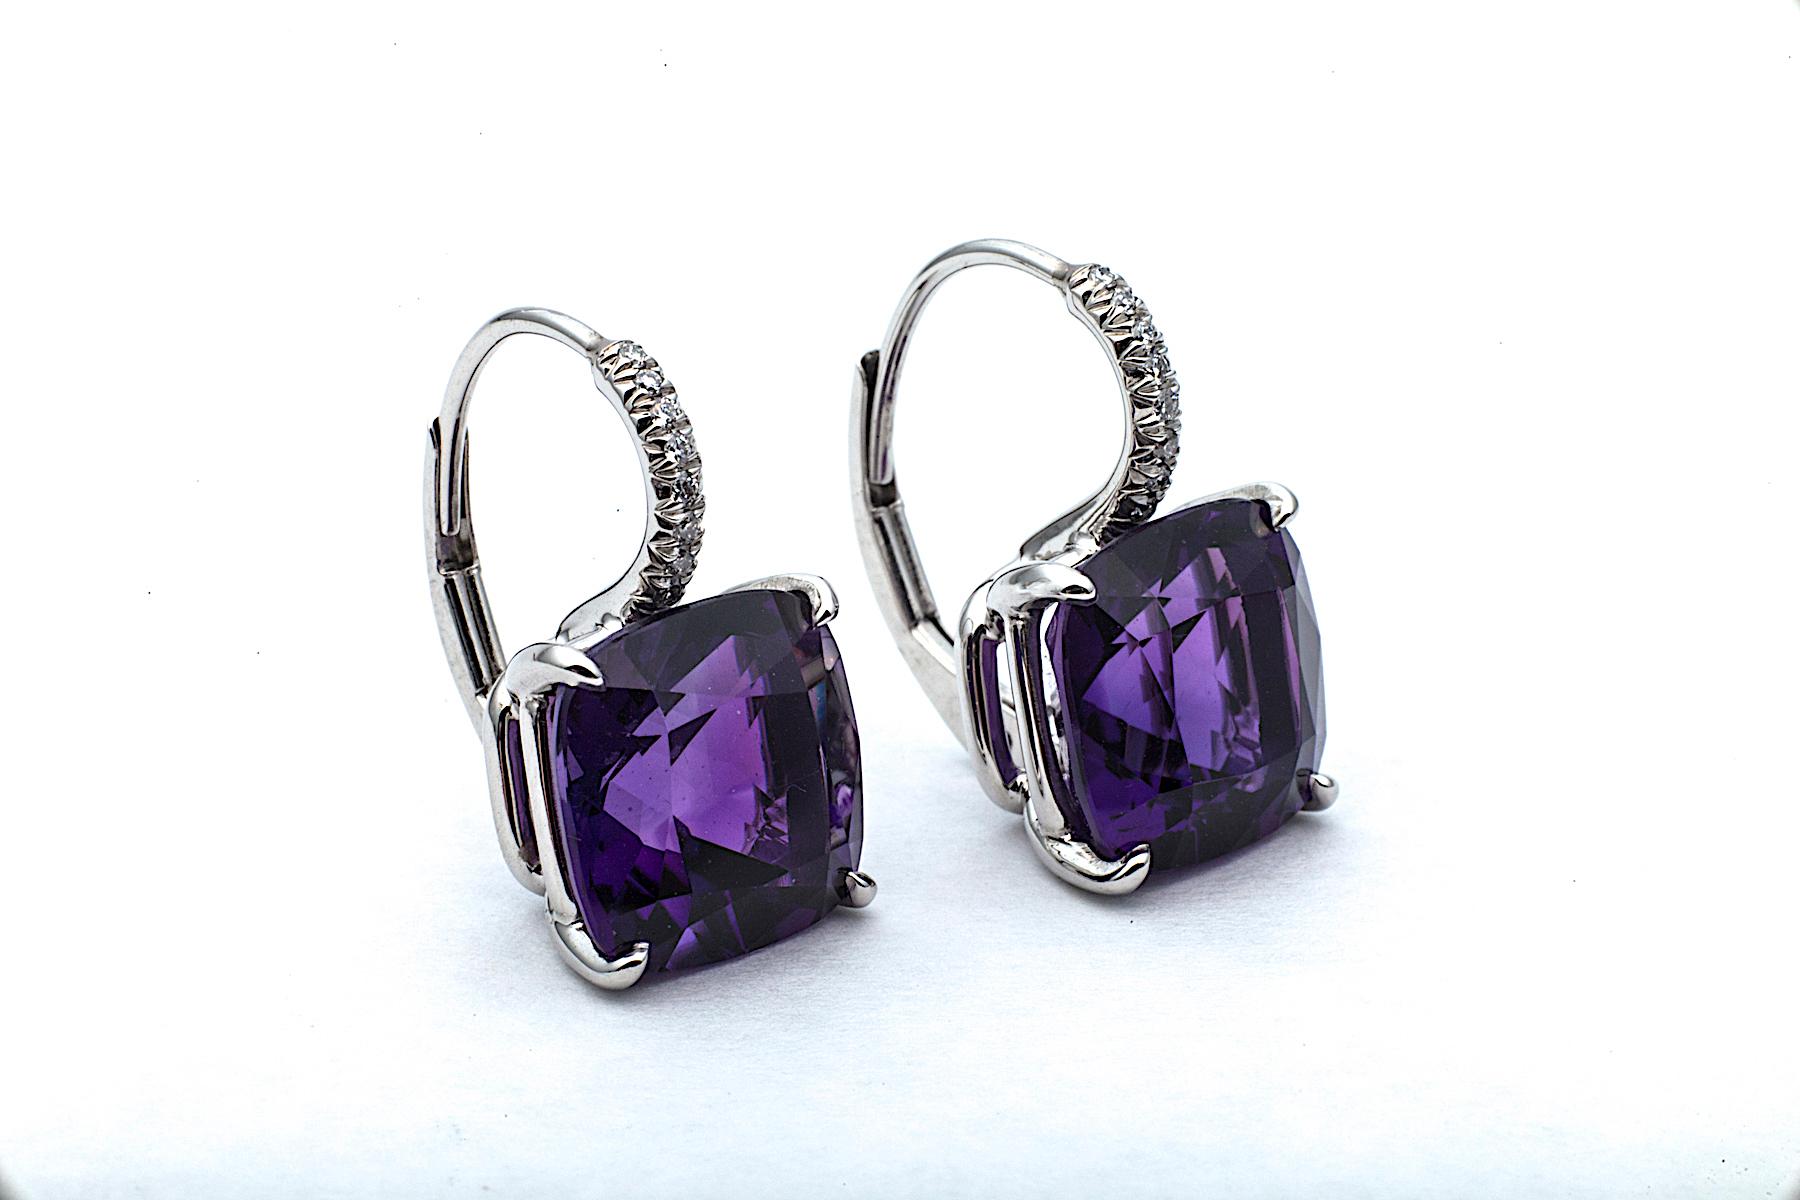 The color purple is associated with royalty, nobility, luxury, and power and these amethyst drop earrings exude those inner strengths.  Mounted in platinum, these cushion cut medium size amethyst gems, weighing a total of 6.84 carats, hang